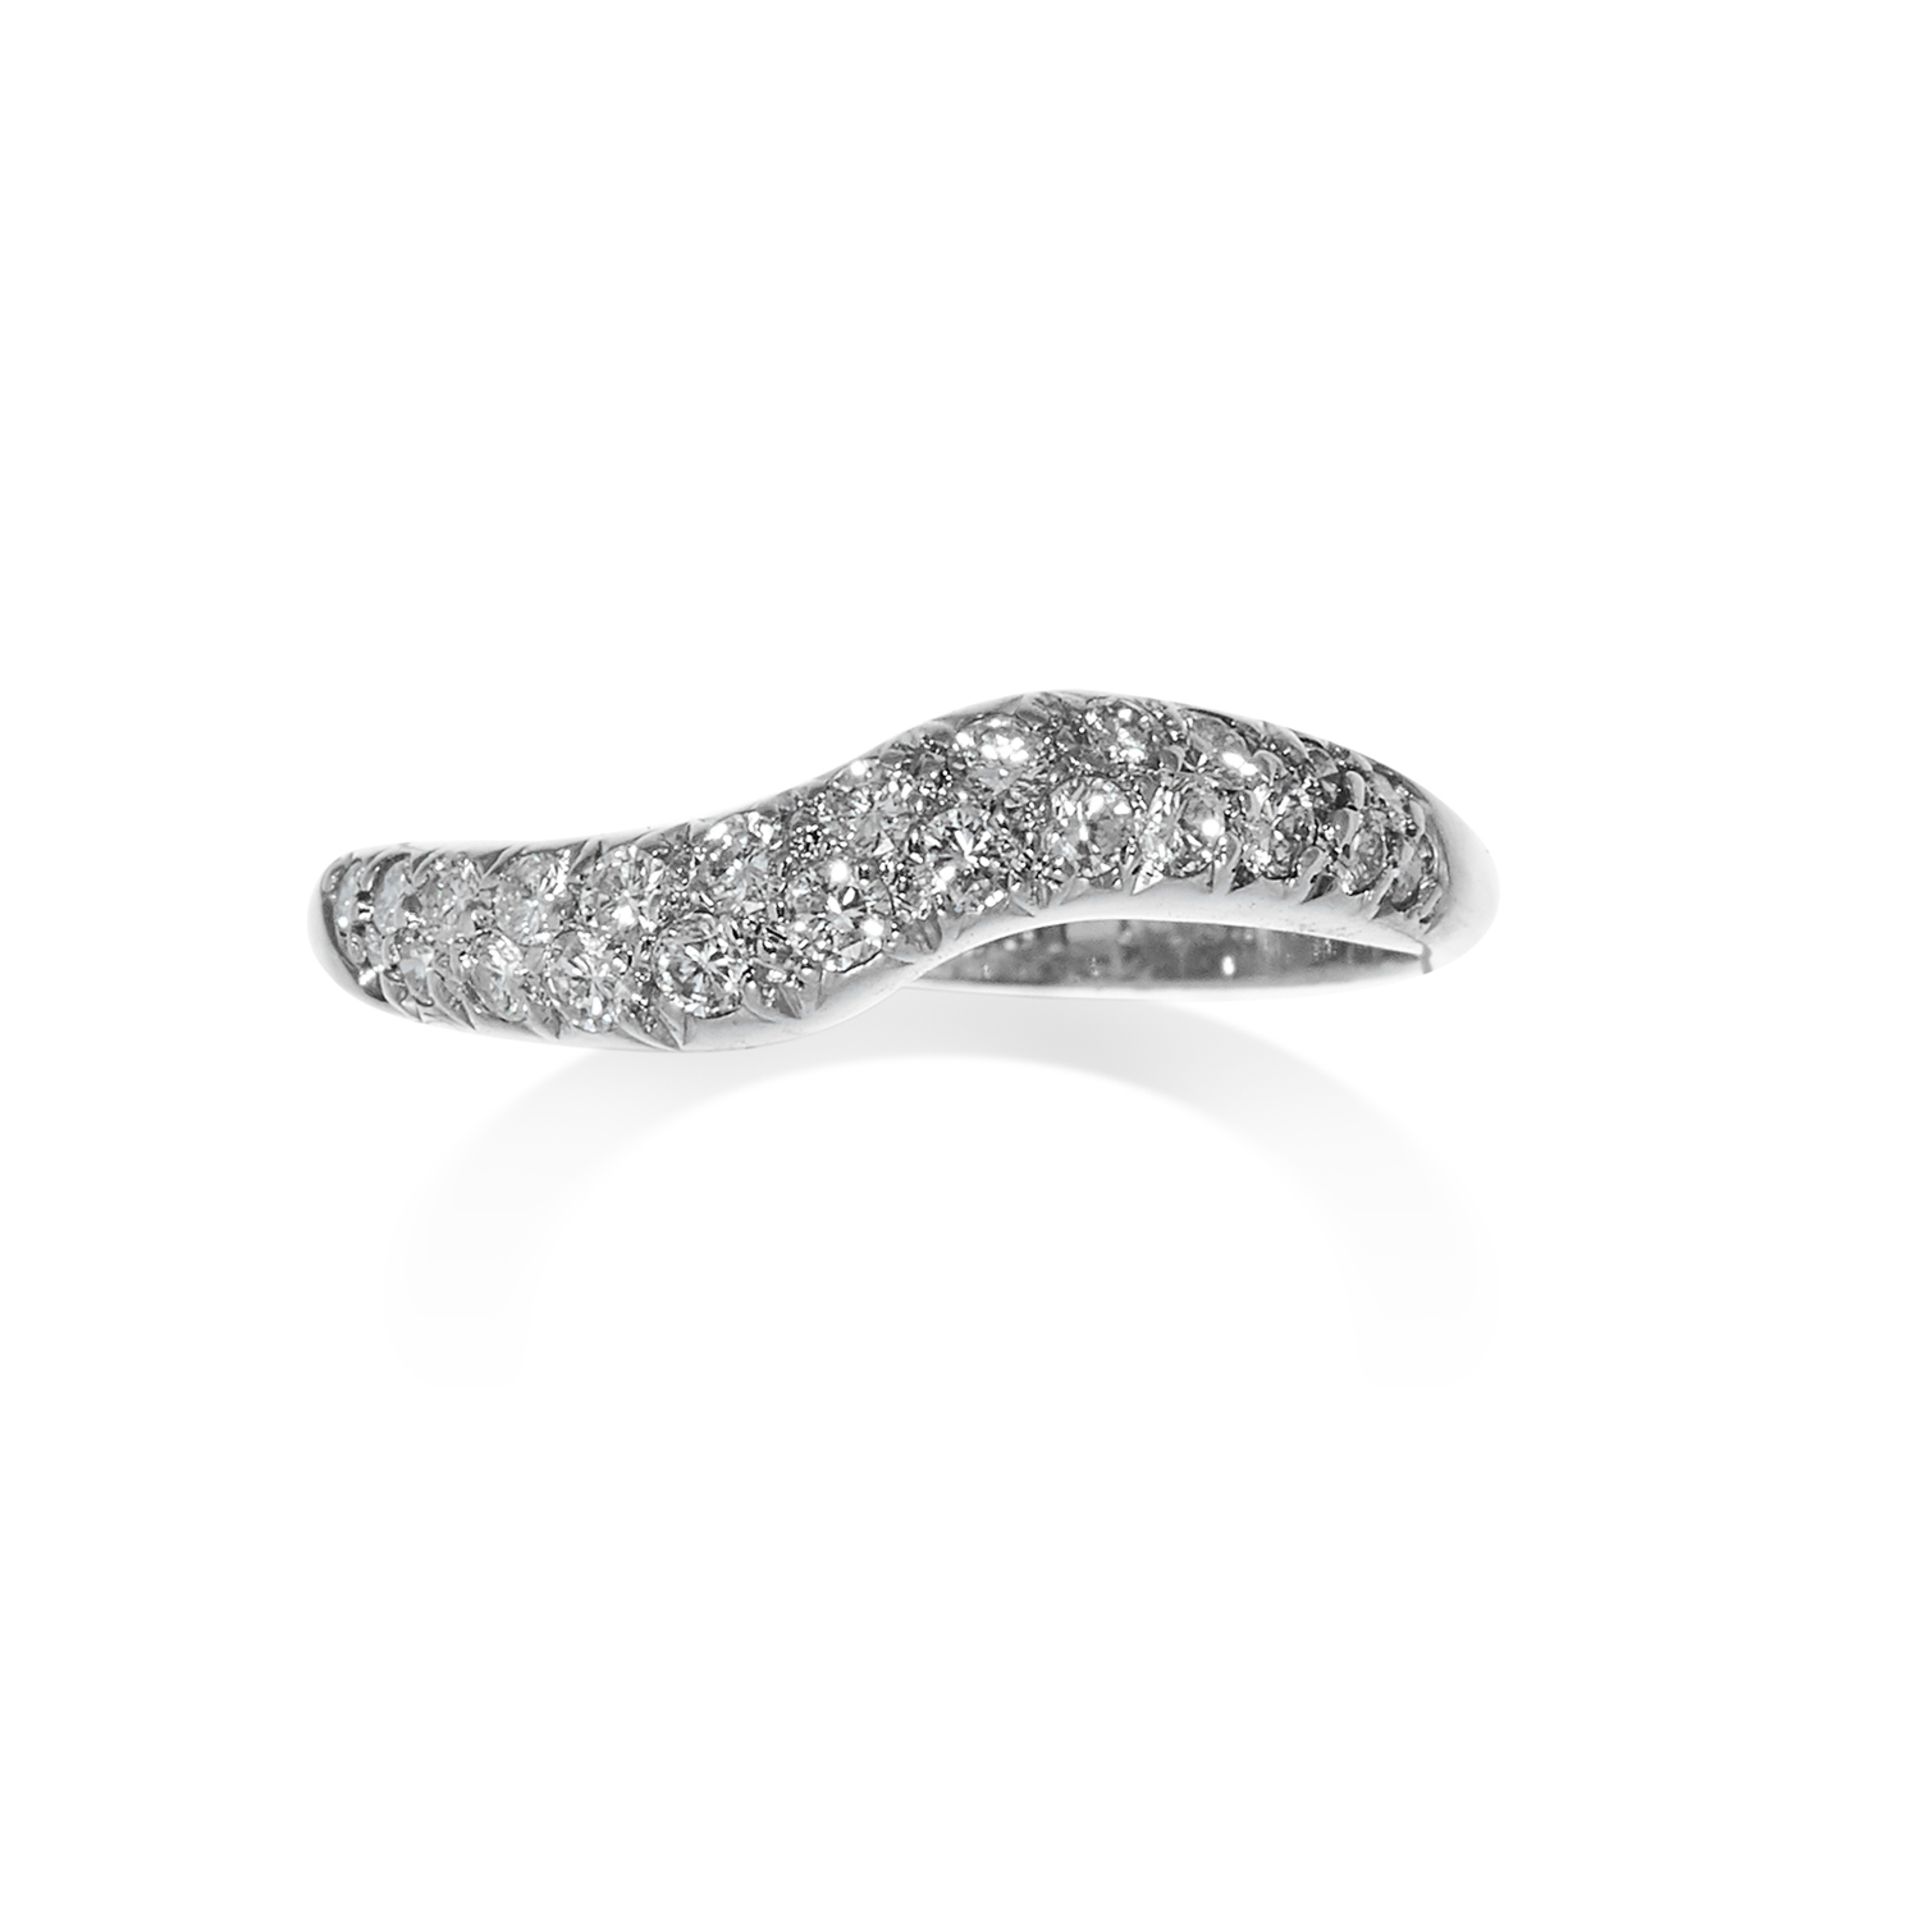 A DIAMOND BAND RING, VAN CLEEF & ARPELS in 18ct white gold, designed as an undulating band